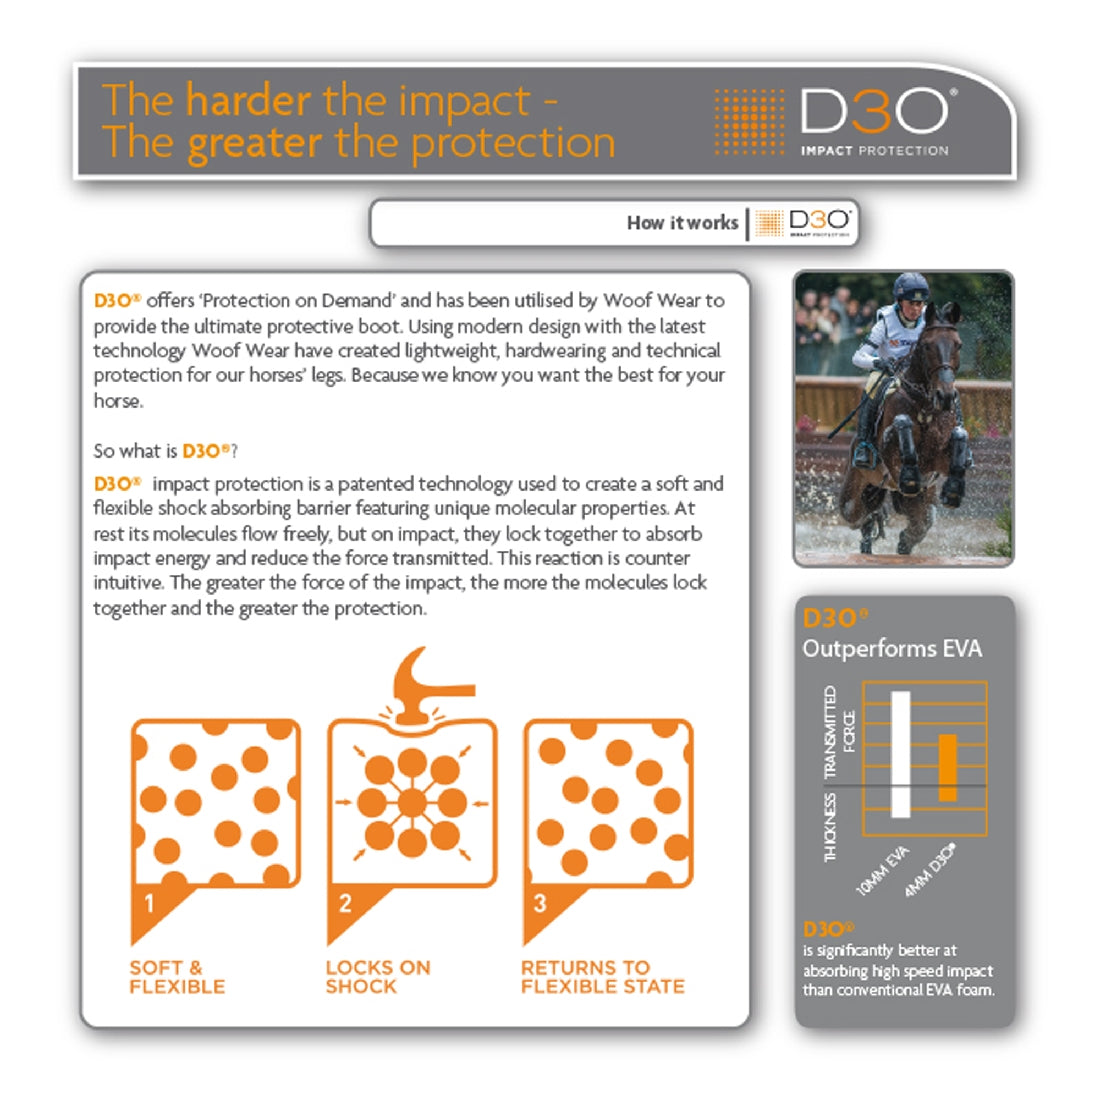 Informative Woof Wear D3O impact protection technology advertisement with diagrams and photo.